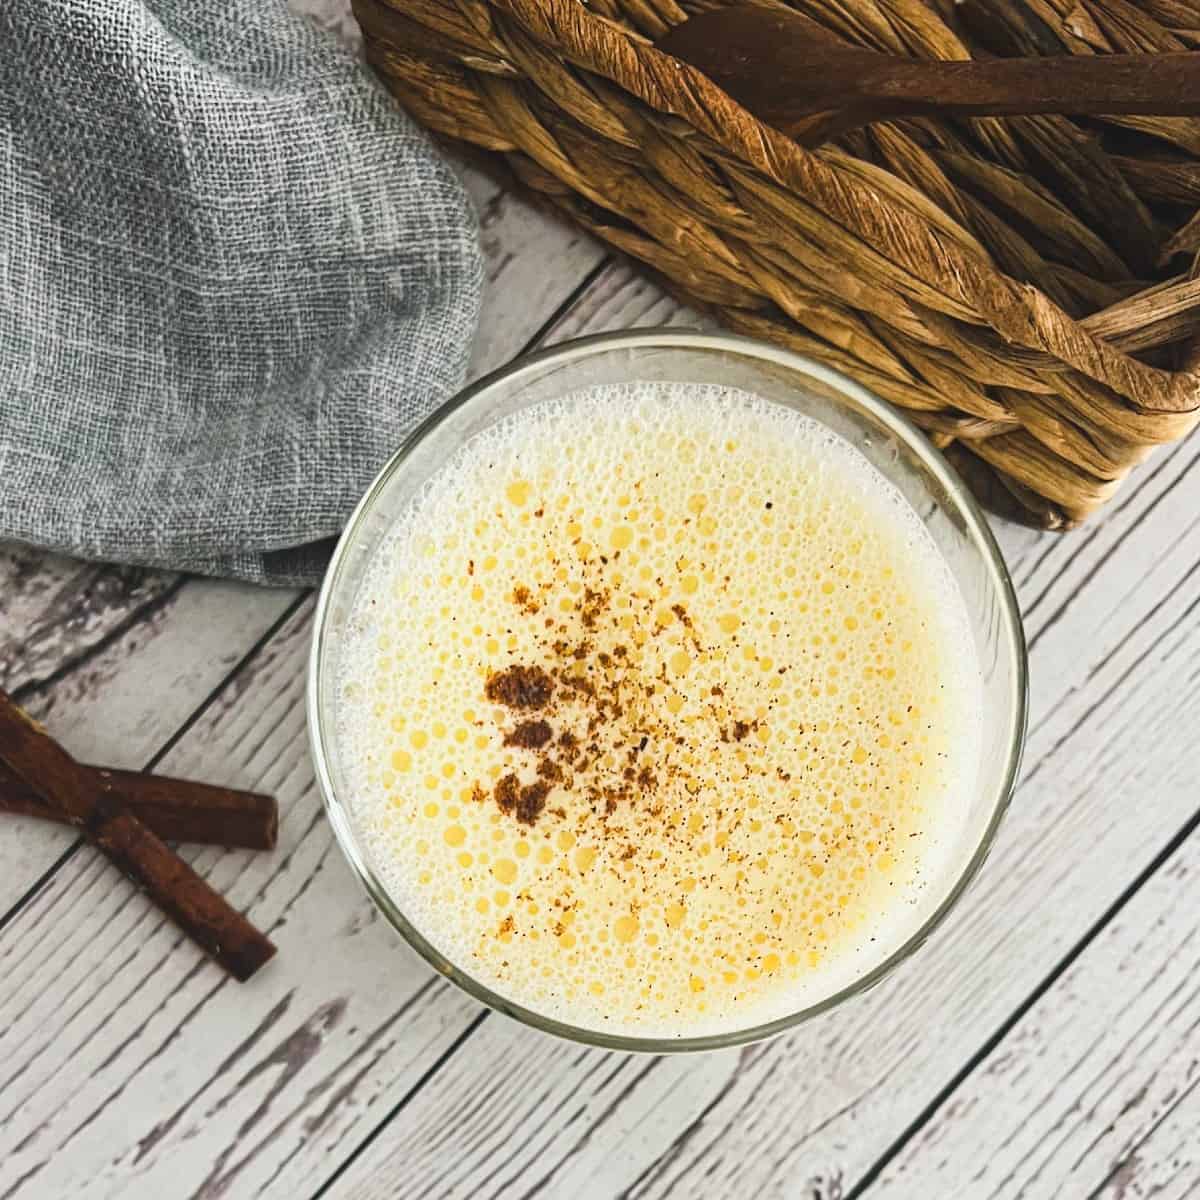 A festive glass of dairy-free eggnog, topped with whipped coconut cream and a sprinkle of cinnamon. Pure holiday cheer, without the dairy!